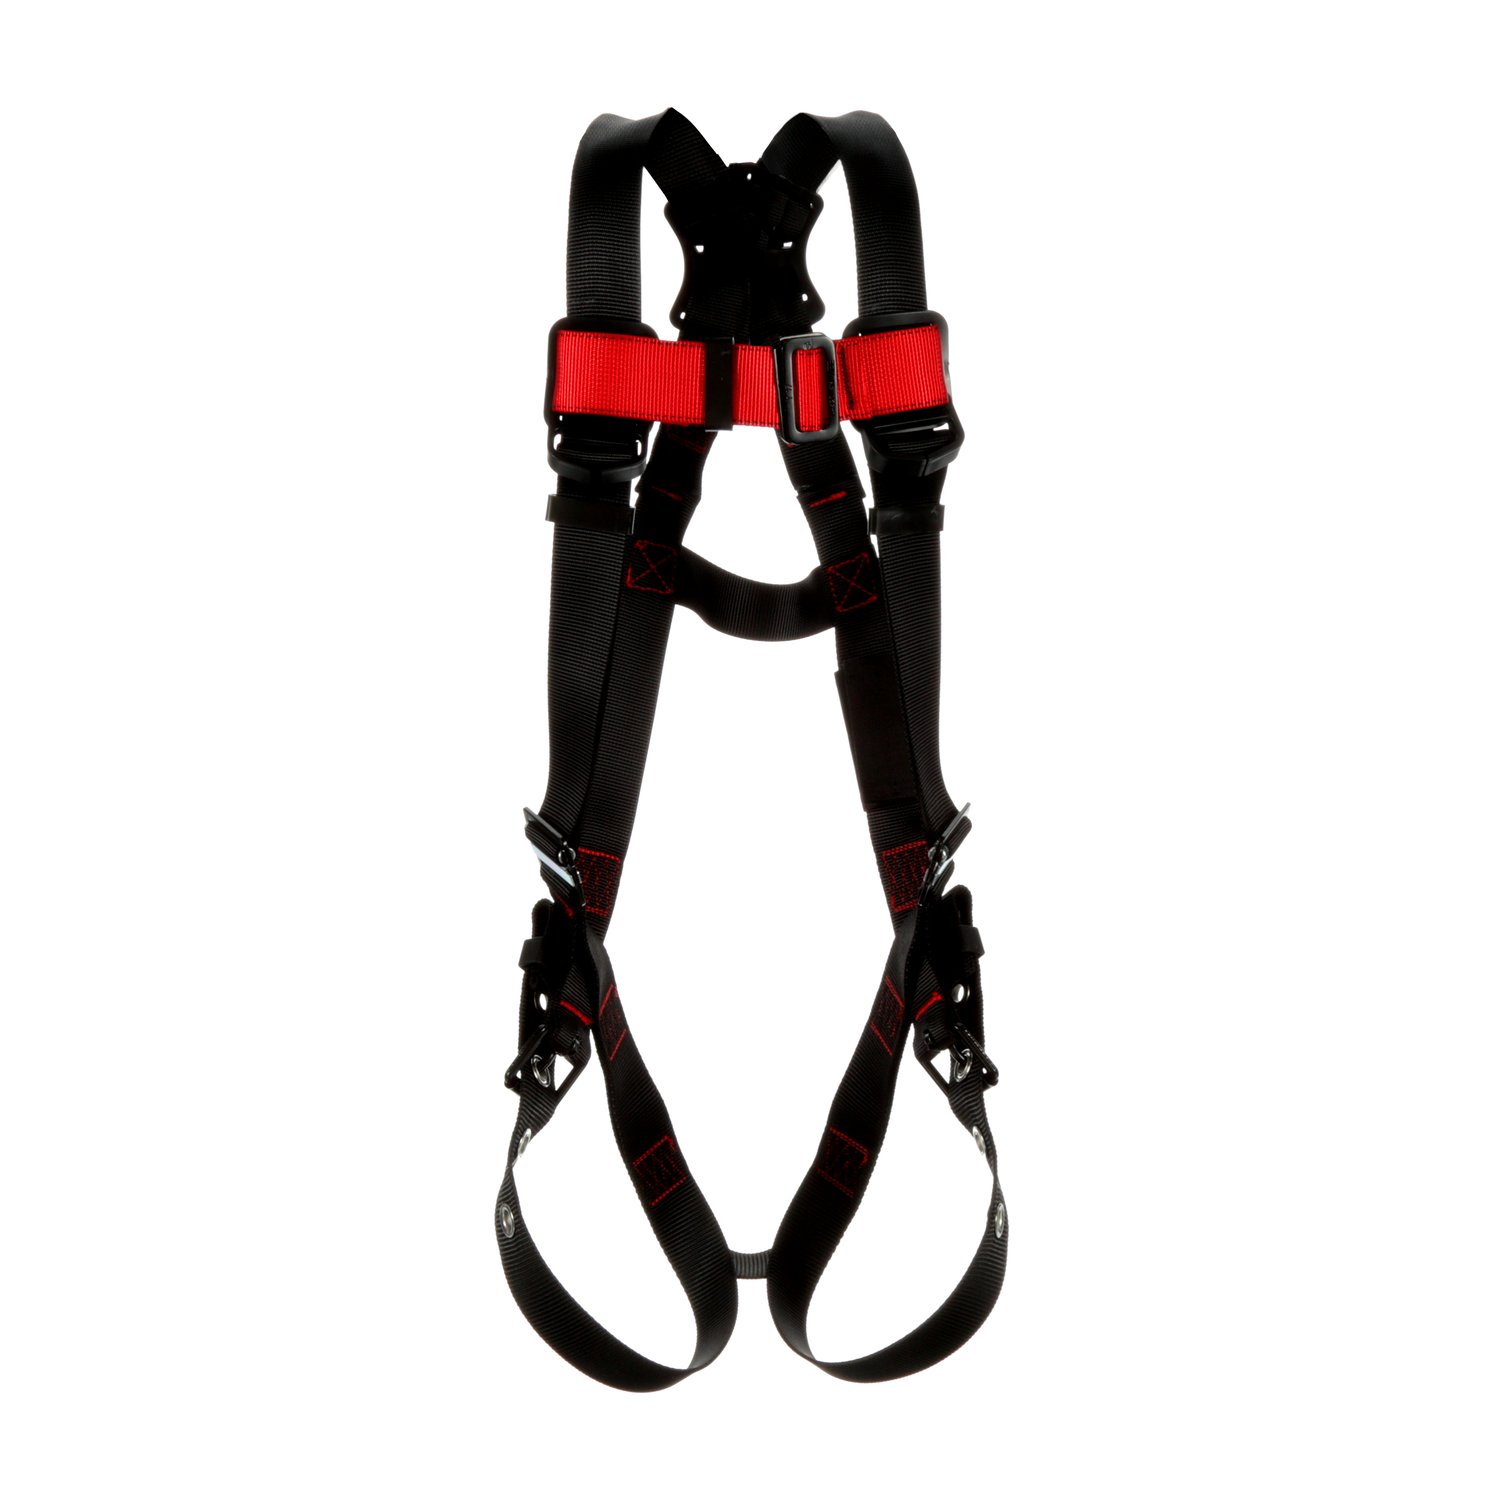 7012816805 - 3M Protecta P200 Vest Safety Harness 1161544, 2X